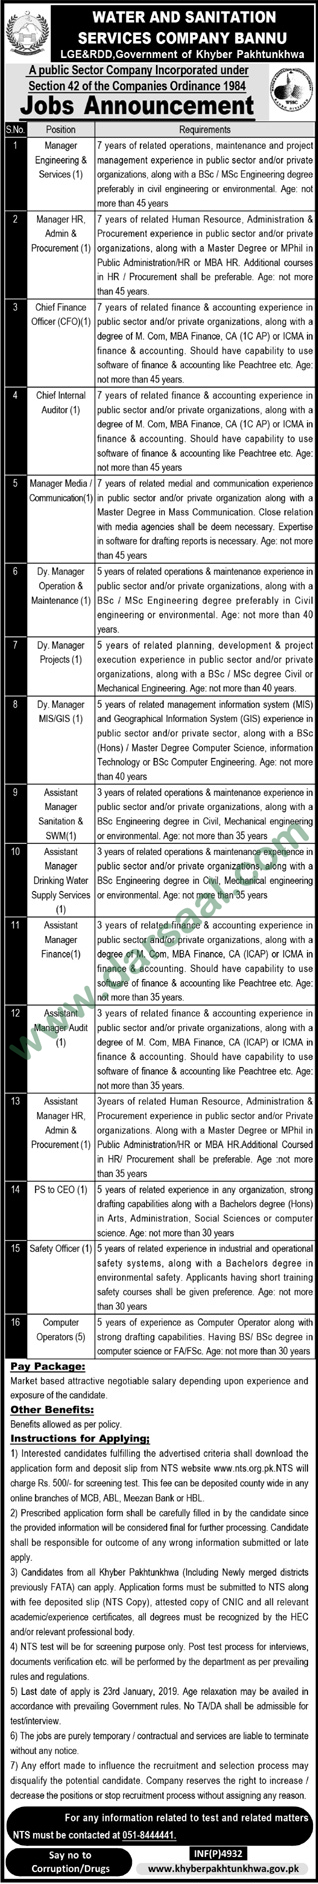 Internal Auditor Jobs in Water & Sanitation Services Company Bannu in Bannu - Dec 27, 2018